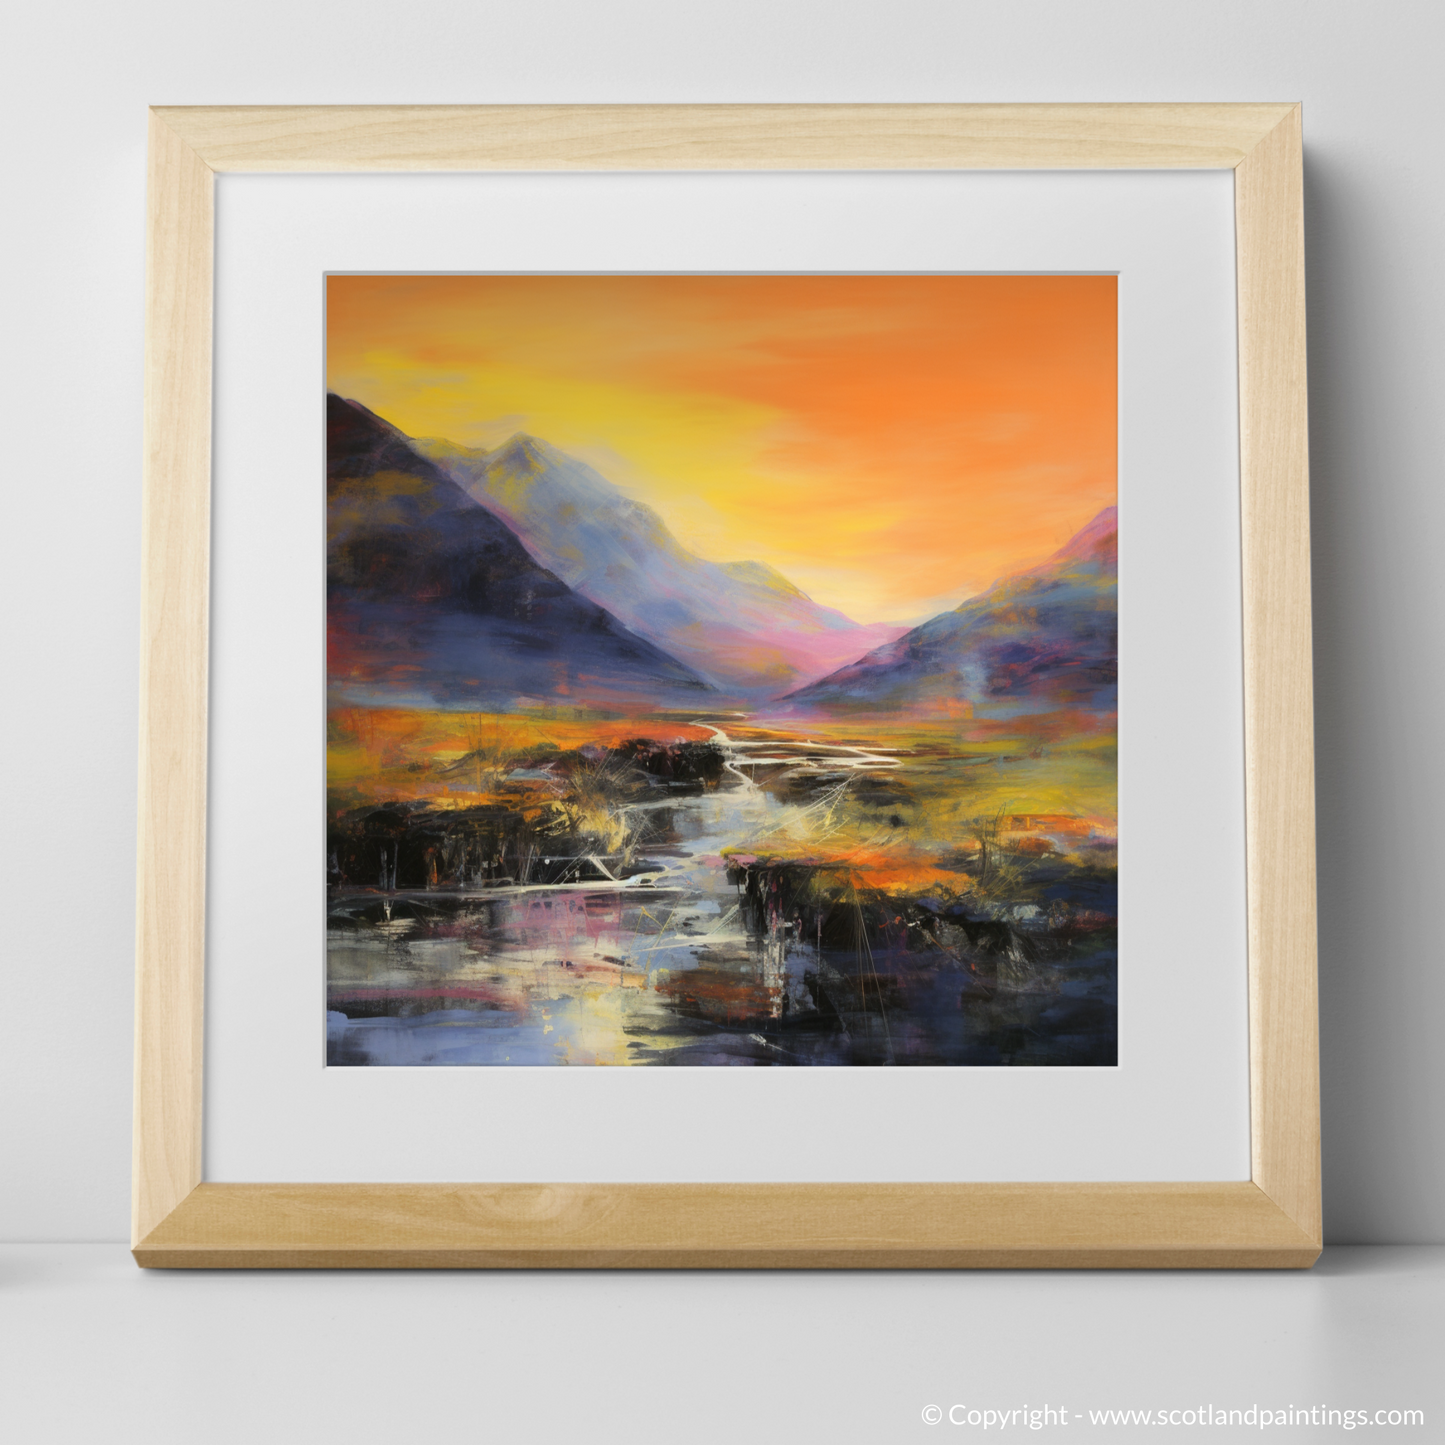 Art Print of Walker crossing River Coe in Glencoe with a natural frame